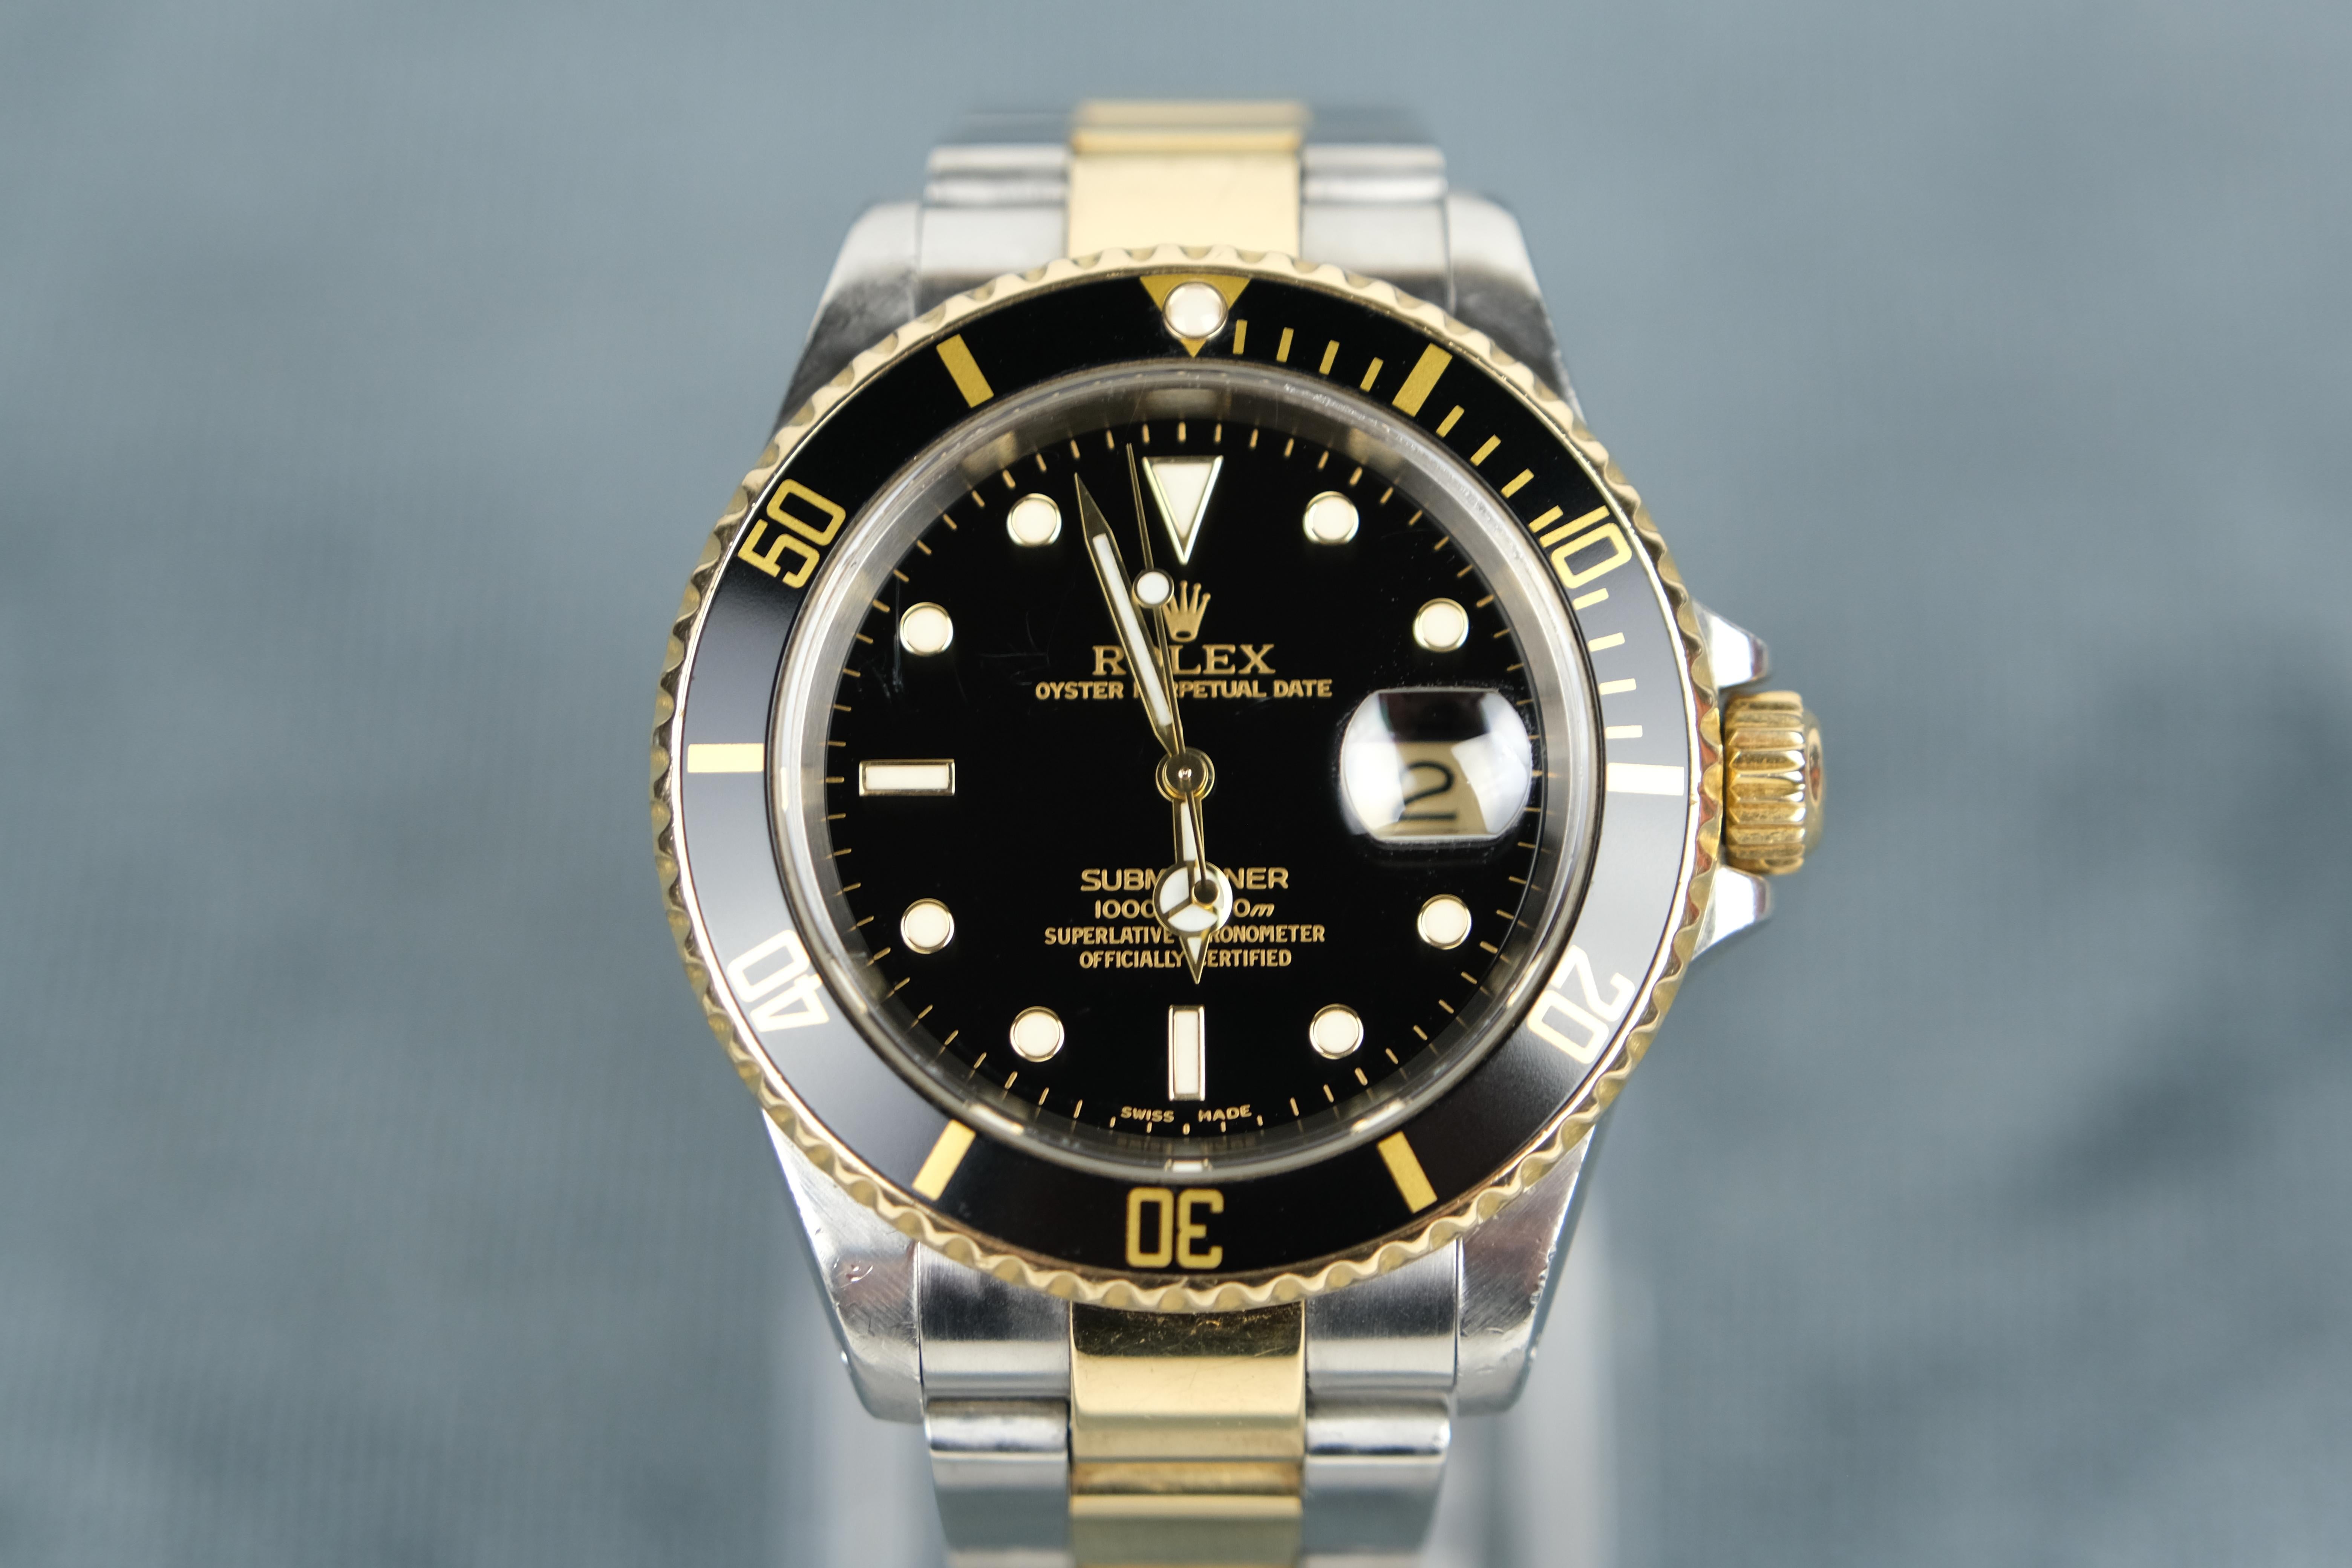 Rolex Submariner Date in 18K Gold and Steel.

Selling this watch is going to be difficult. I did purchase it to resell but then stupidly, I put it on. It fit perfectly and well, it is a Rolex Submariner so I should not have put it on. It was